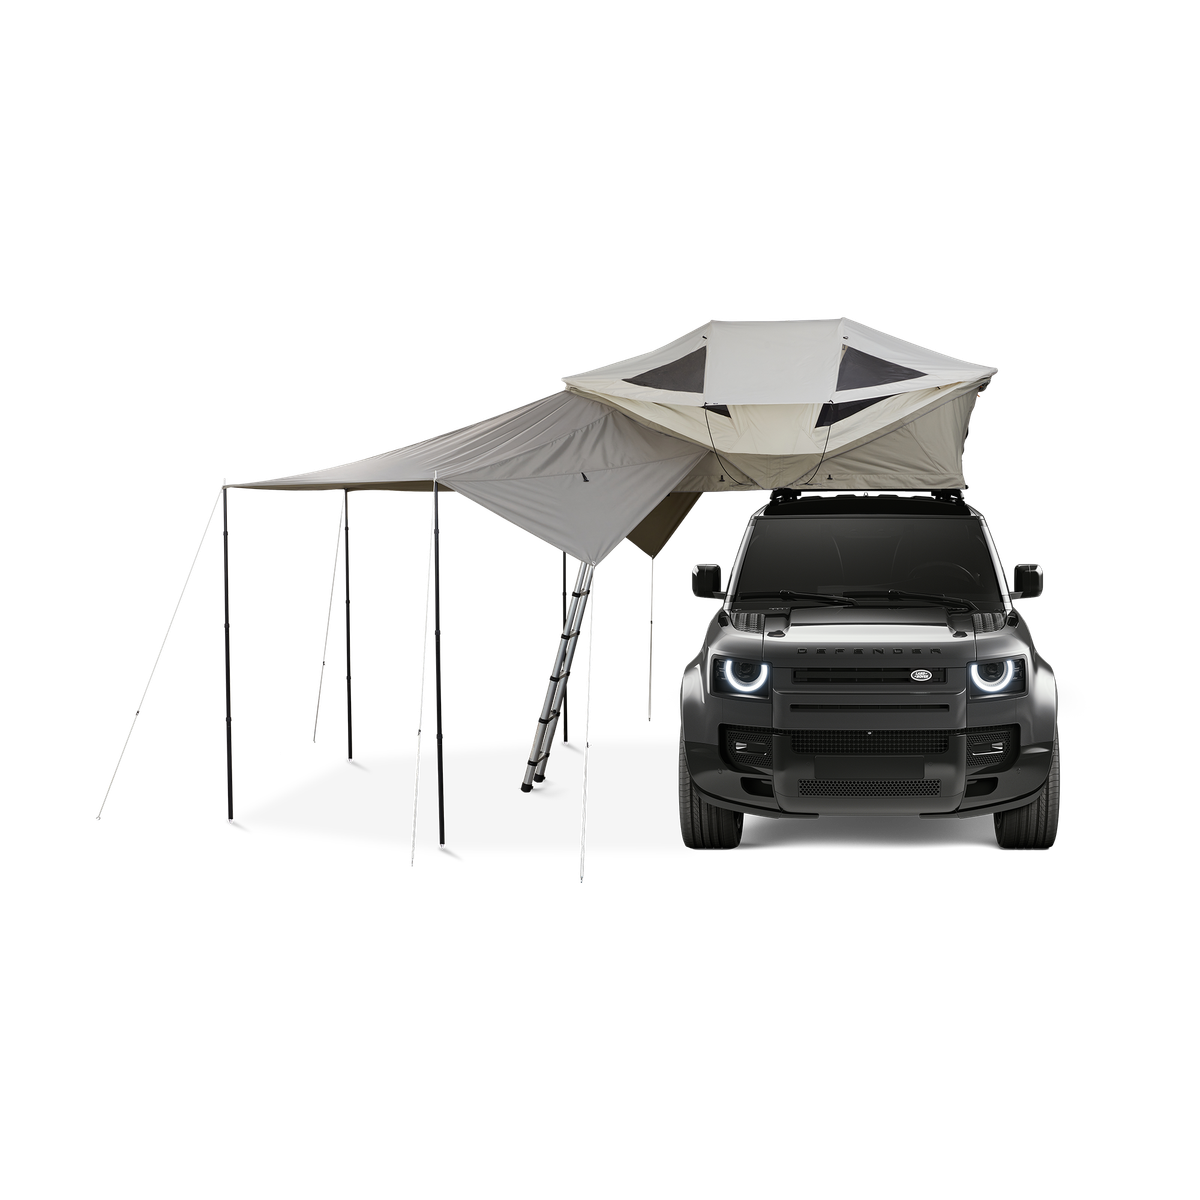 Thule Approach Awning L 4-person roof top tent awning